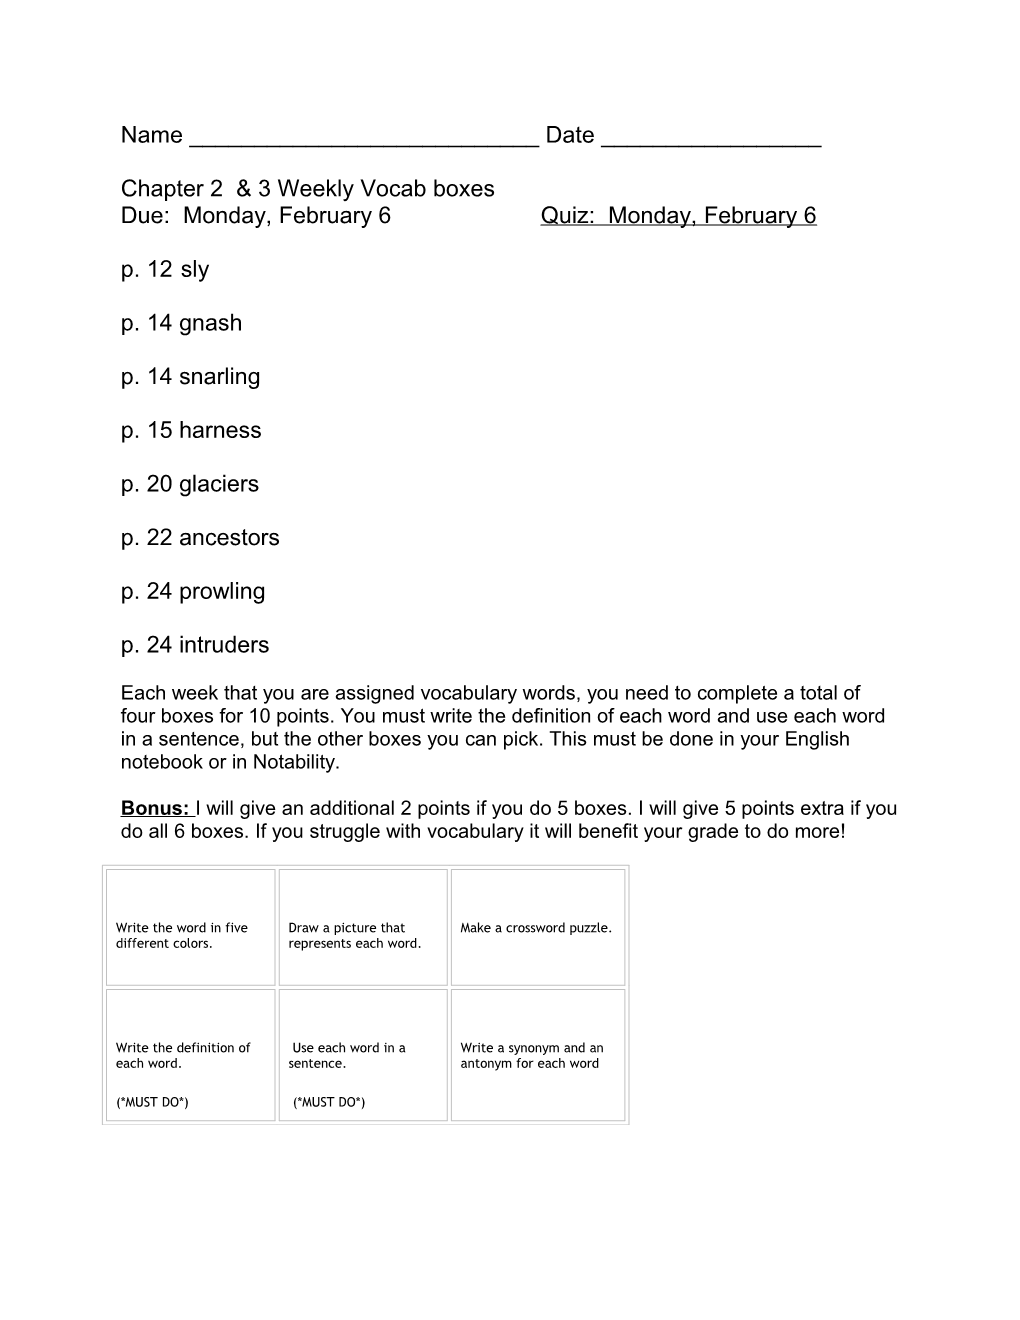 Chapter 2 & 3 Weekly Vocab Boxes